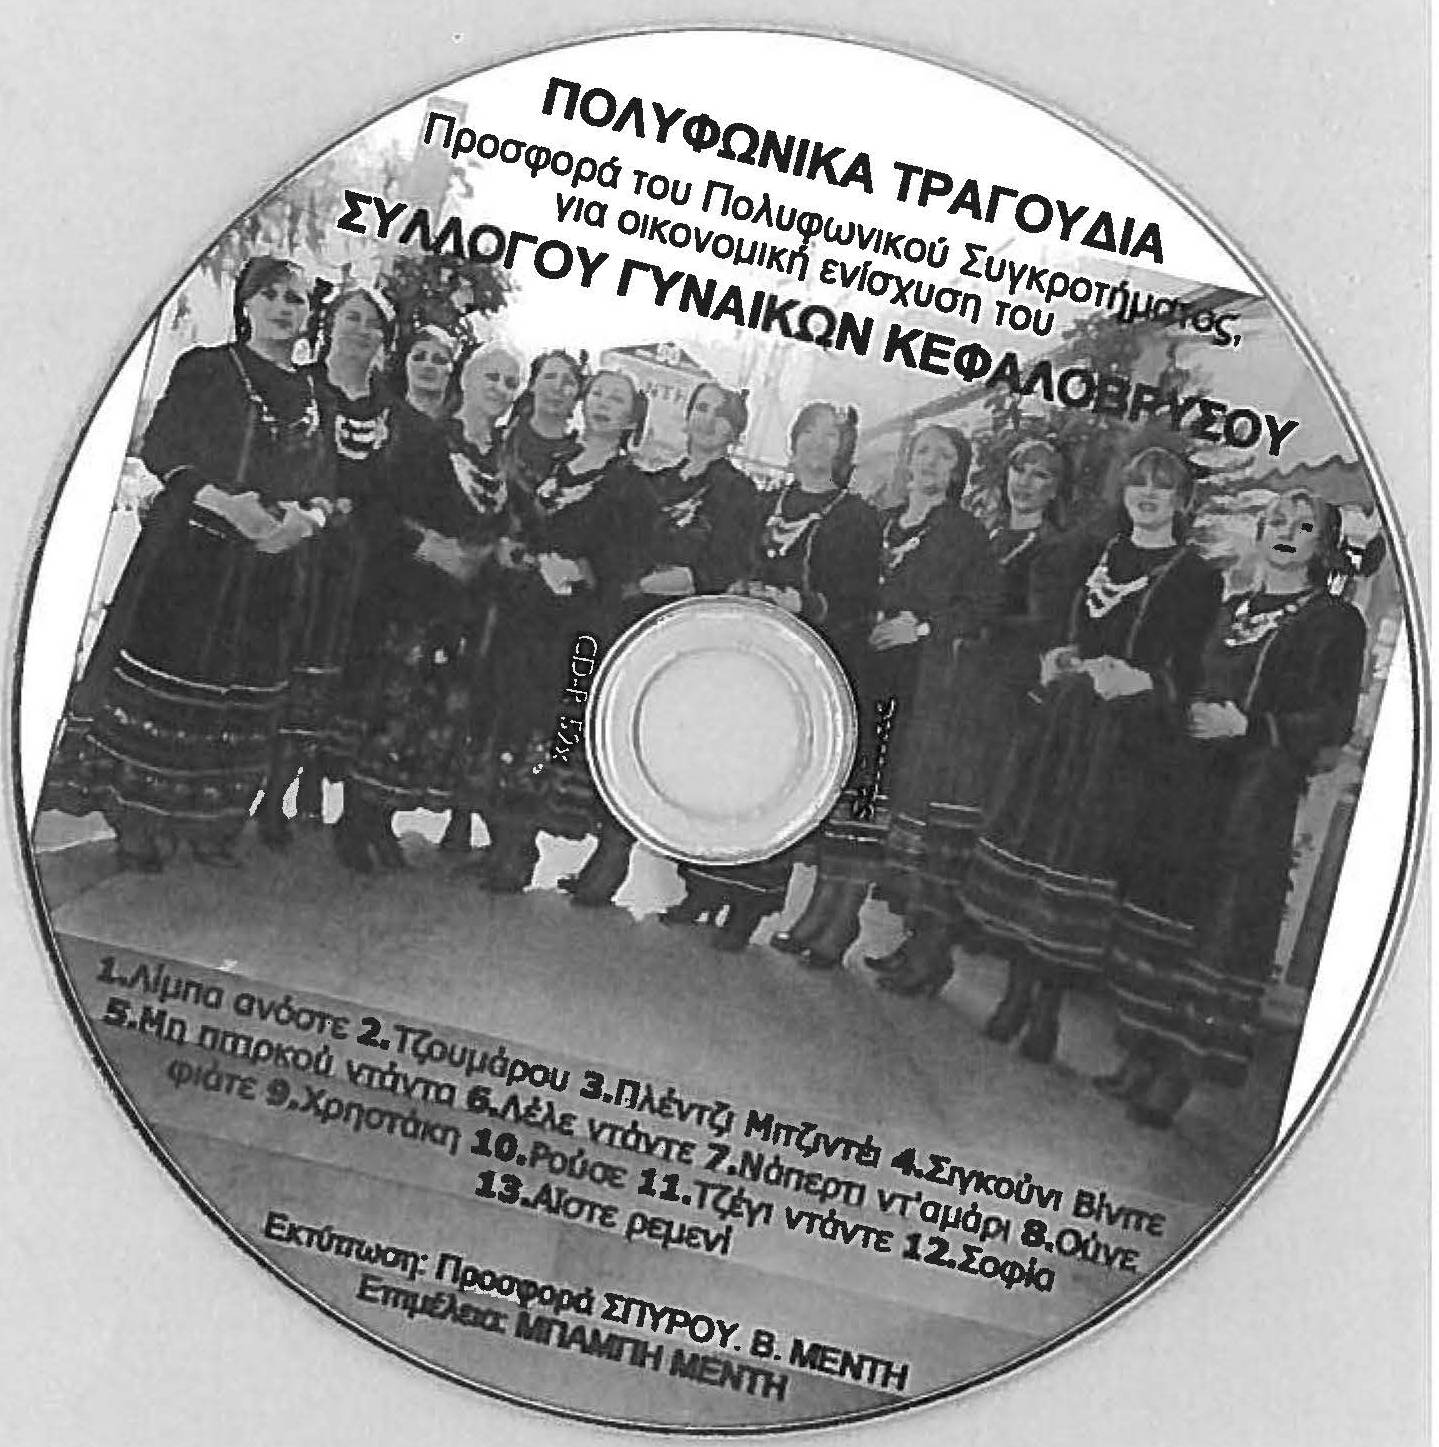 POLYPHONIC SONGS OF THE ASSOCIATION OF WOMEN OF KEFALOVRISI 